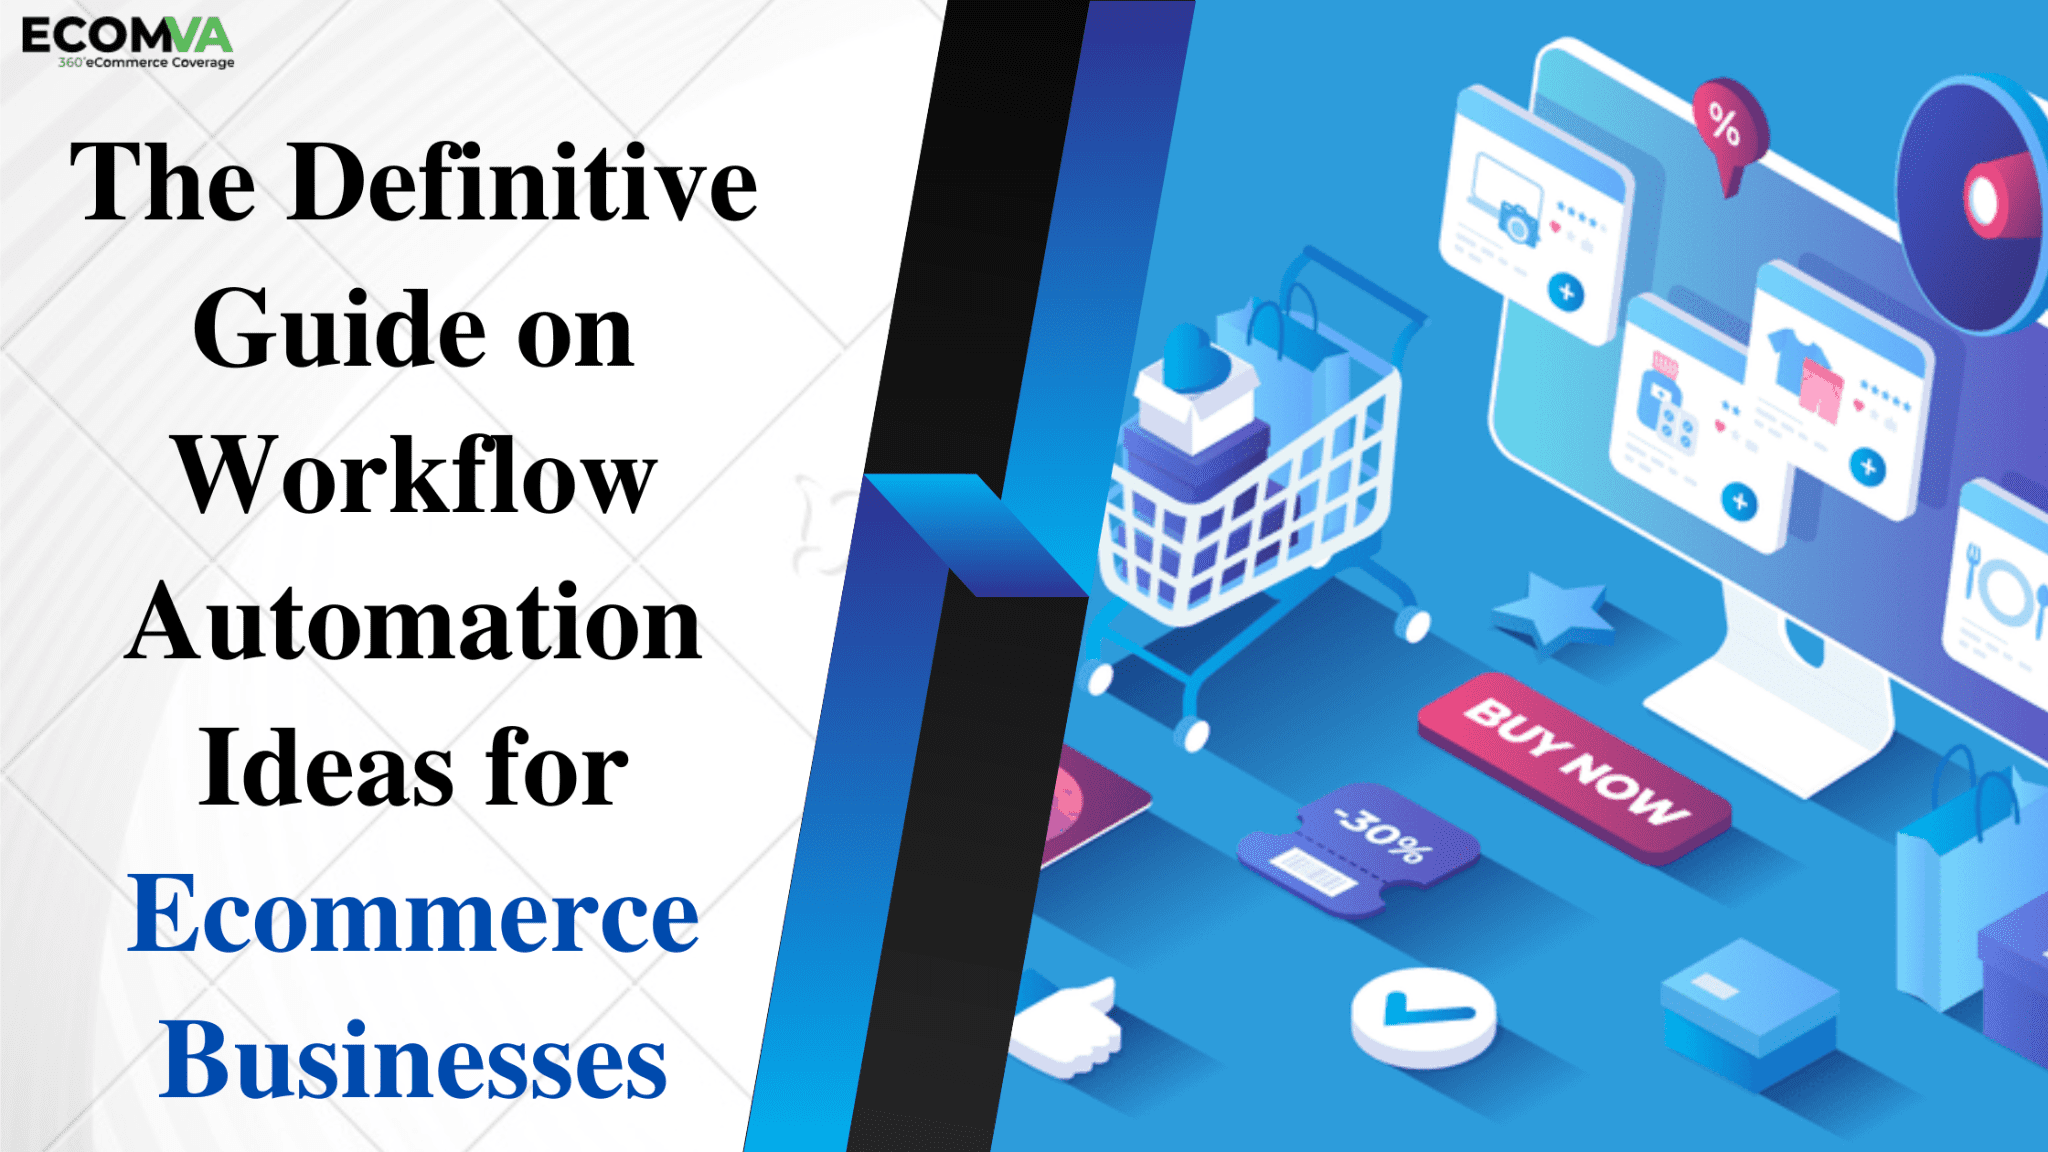 The Definitive Guide on Workflow Automation Ideas for Ecommerce Businesses